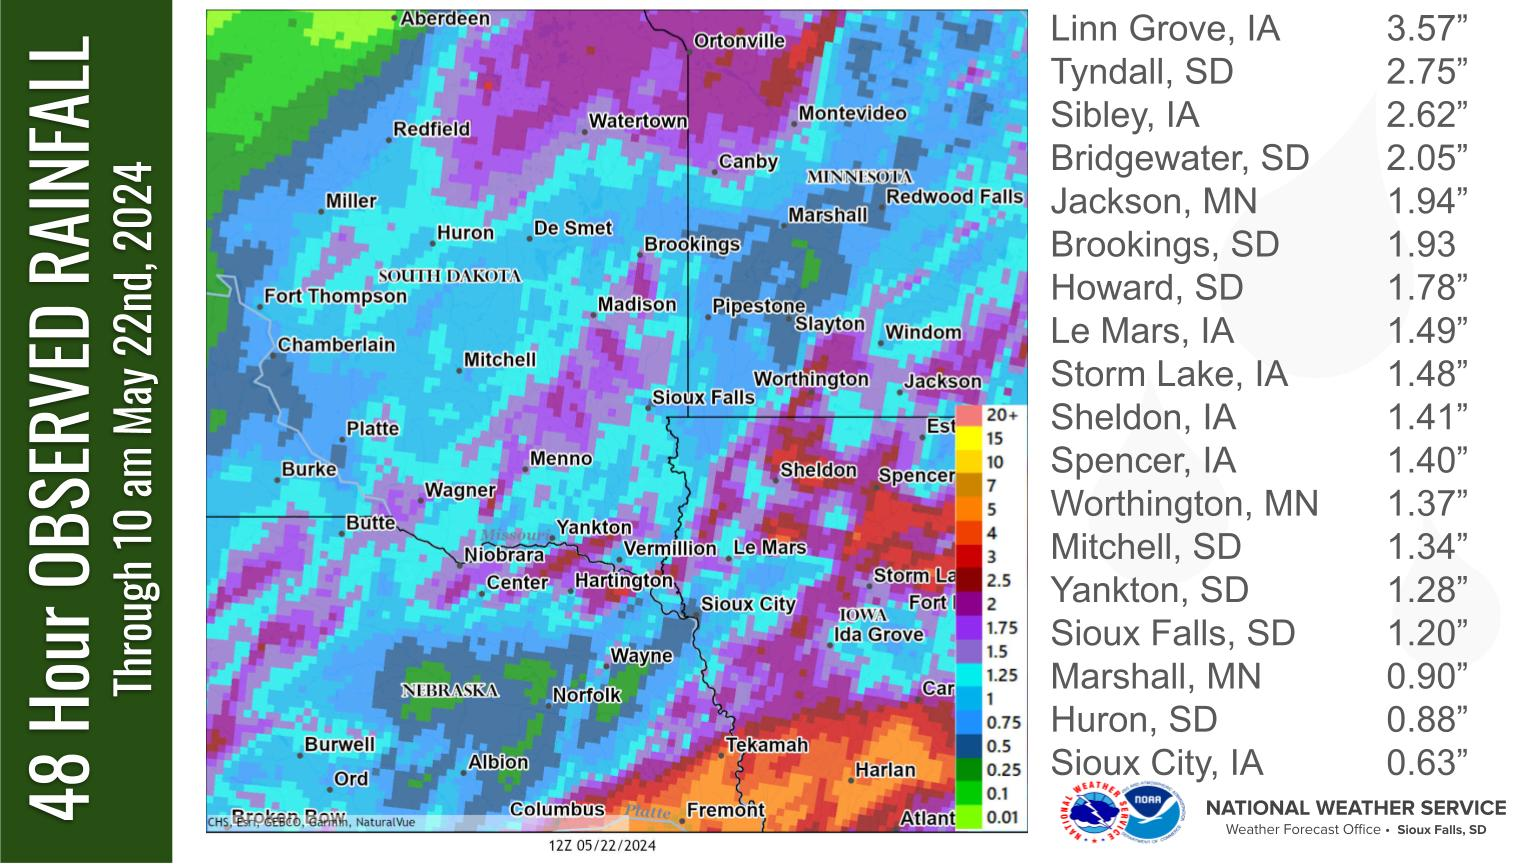 48 hour rainfall map for May 20 through 22. Greatest amounts were located over northwestern Iowa, with another area of heavy rainfall from Brookings to Wagner, South Dakota.